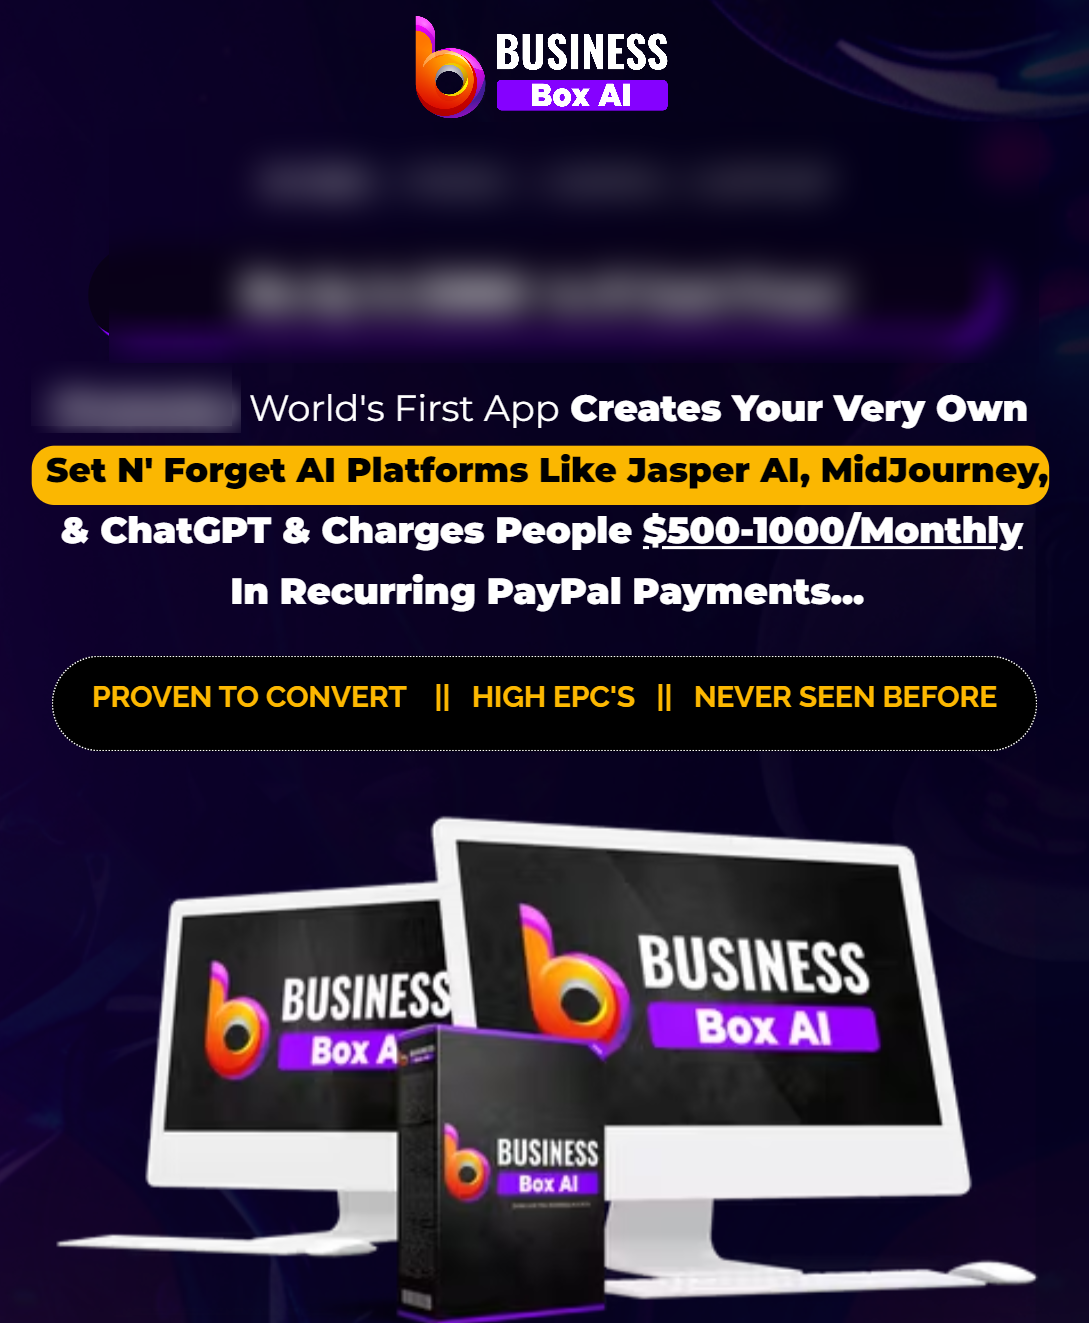 Business In Box JV Invite Business Box AI Review: Creates Your Very Own  Set N' Forget AI Platforms Like MidJourney, Jasper AI, ChatGPT And Charges People $300-1000/Monthly  In Recurring Payments. Should You Buy it?